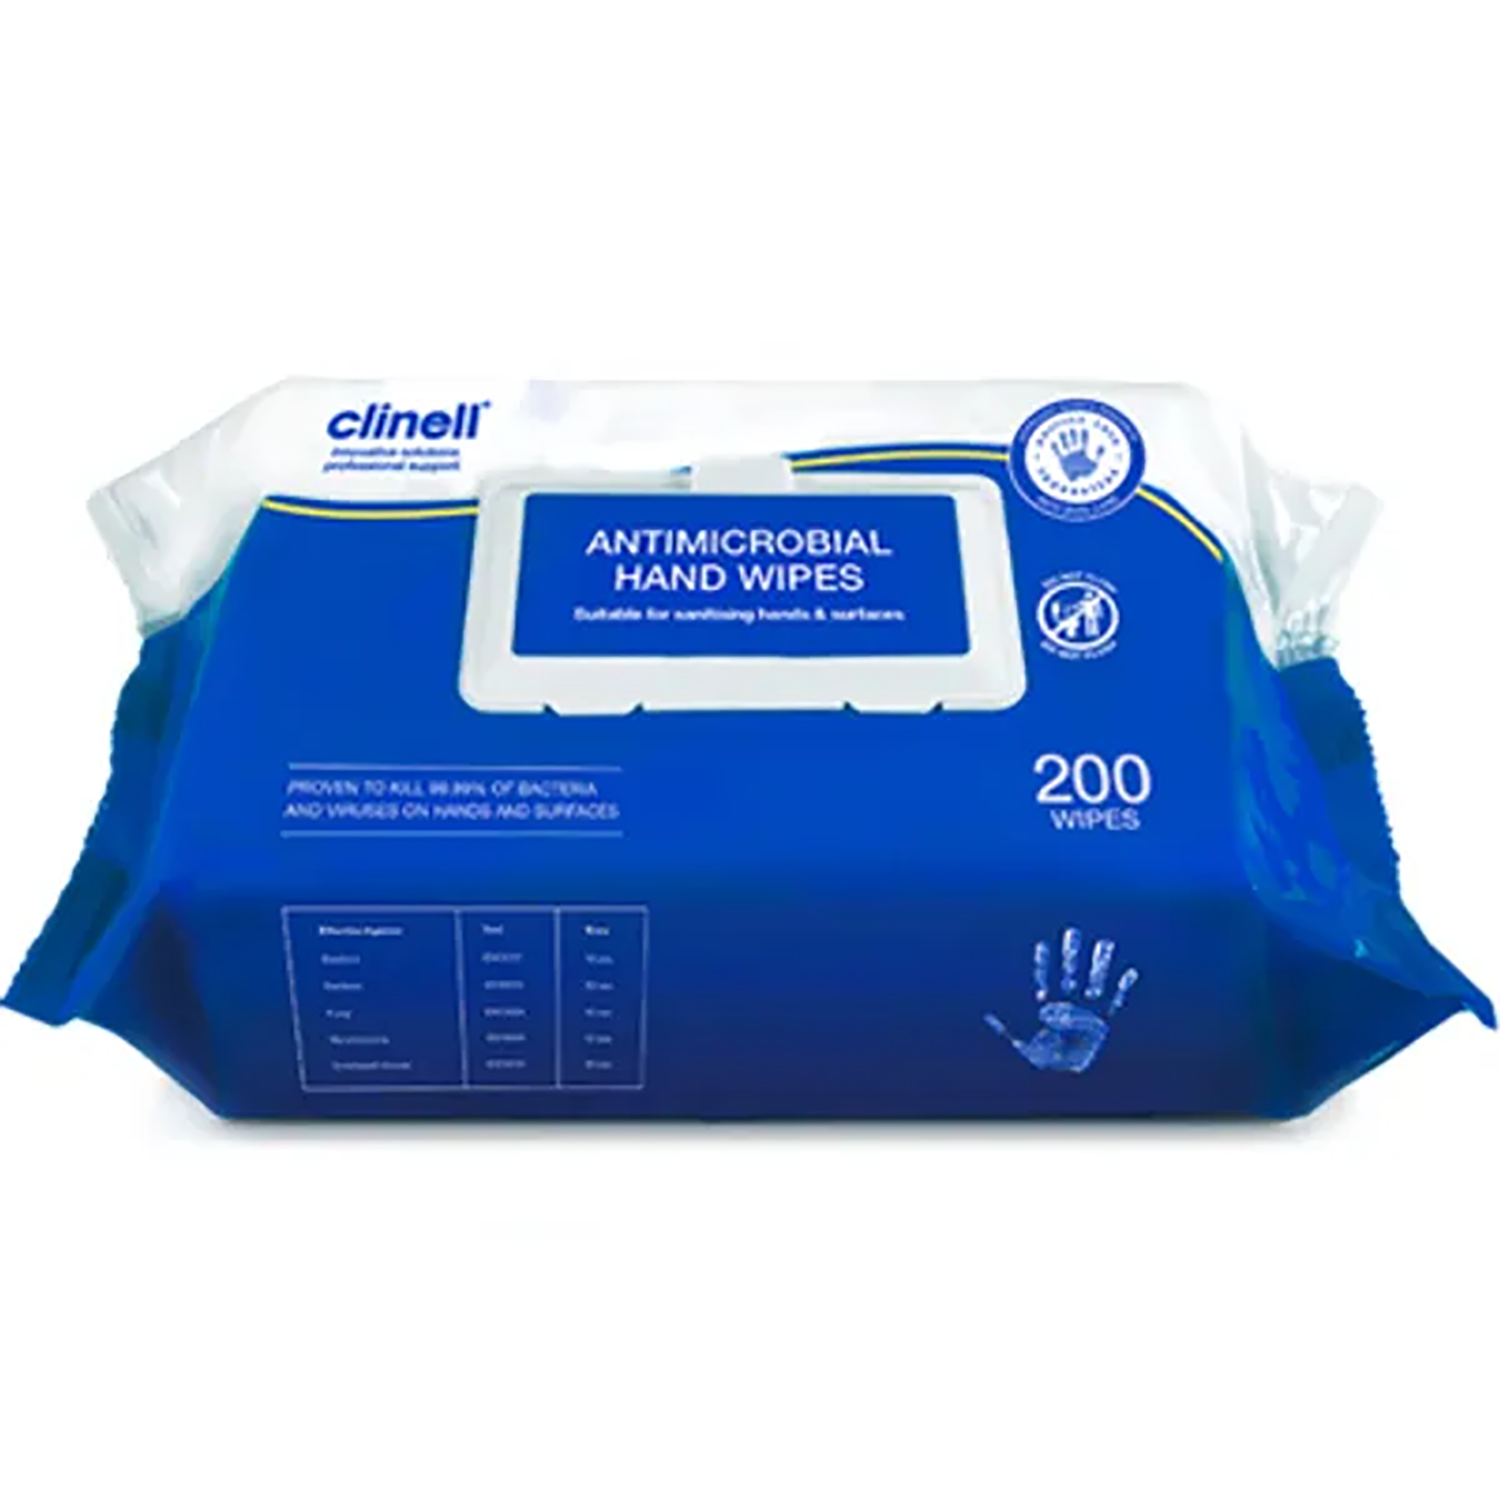 Clinell Antimicrobial Hand Wipes | Pack of 200